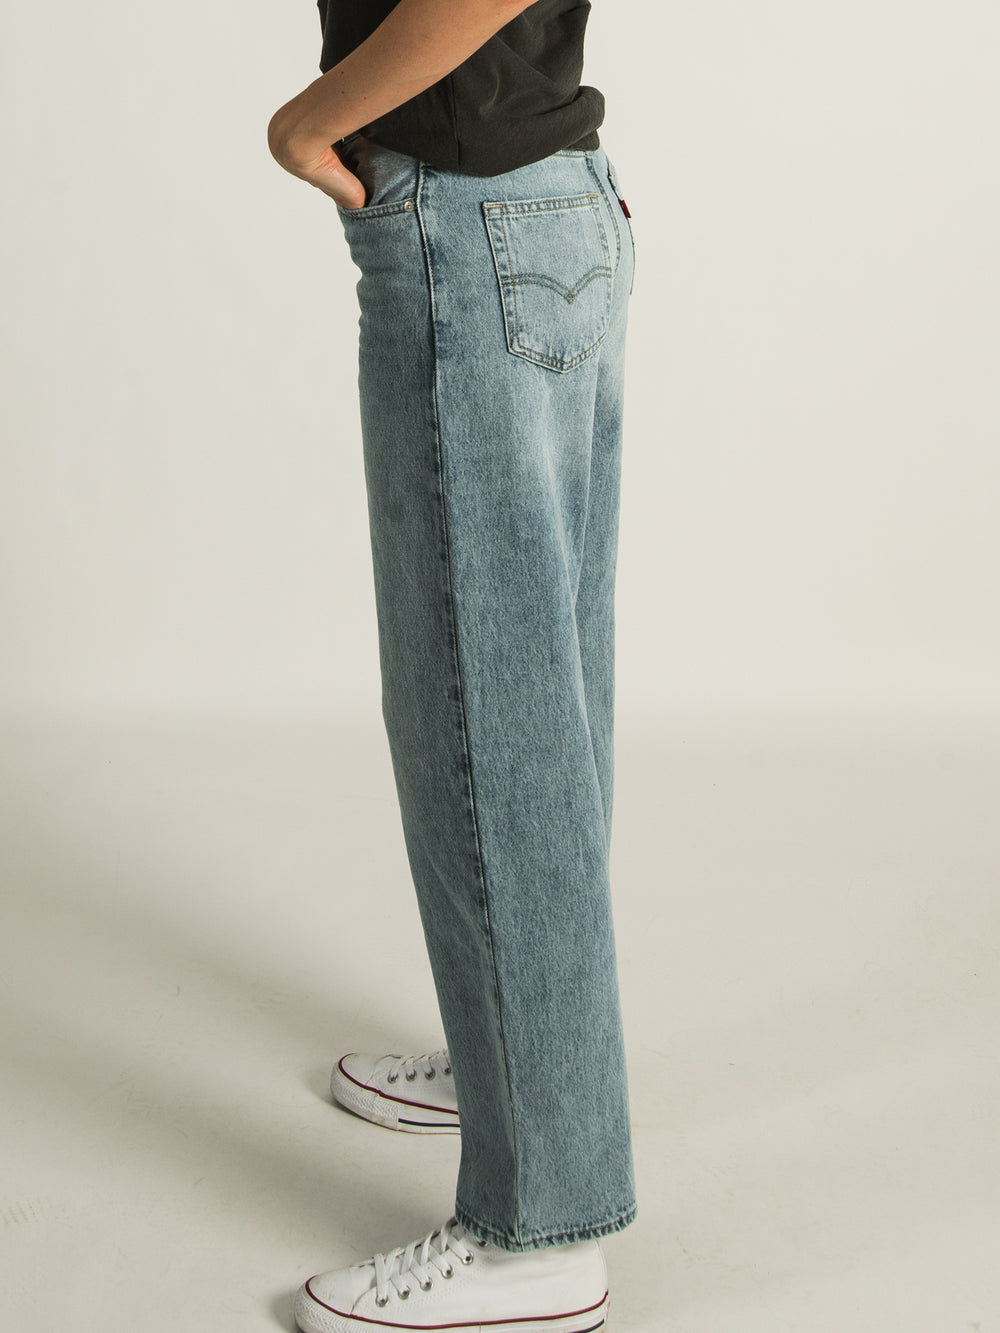 LEVIS 94 BAGGY - CLEARANCE